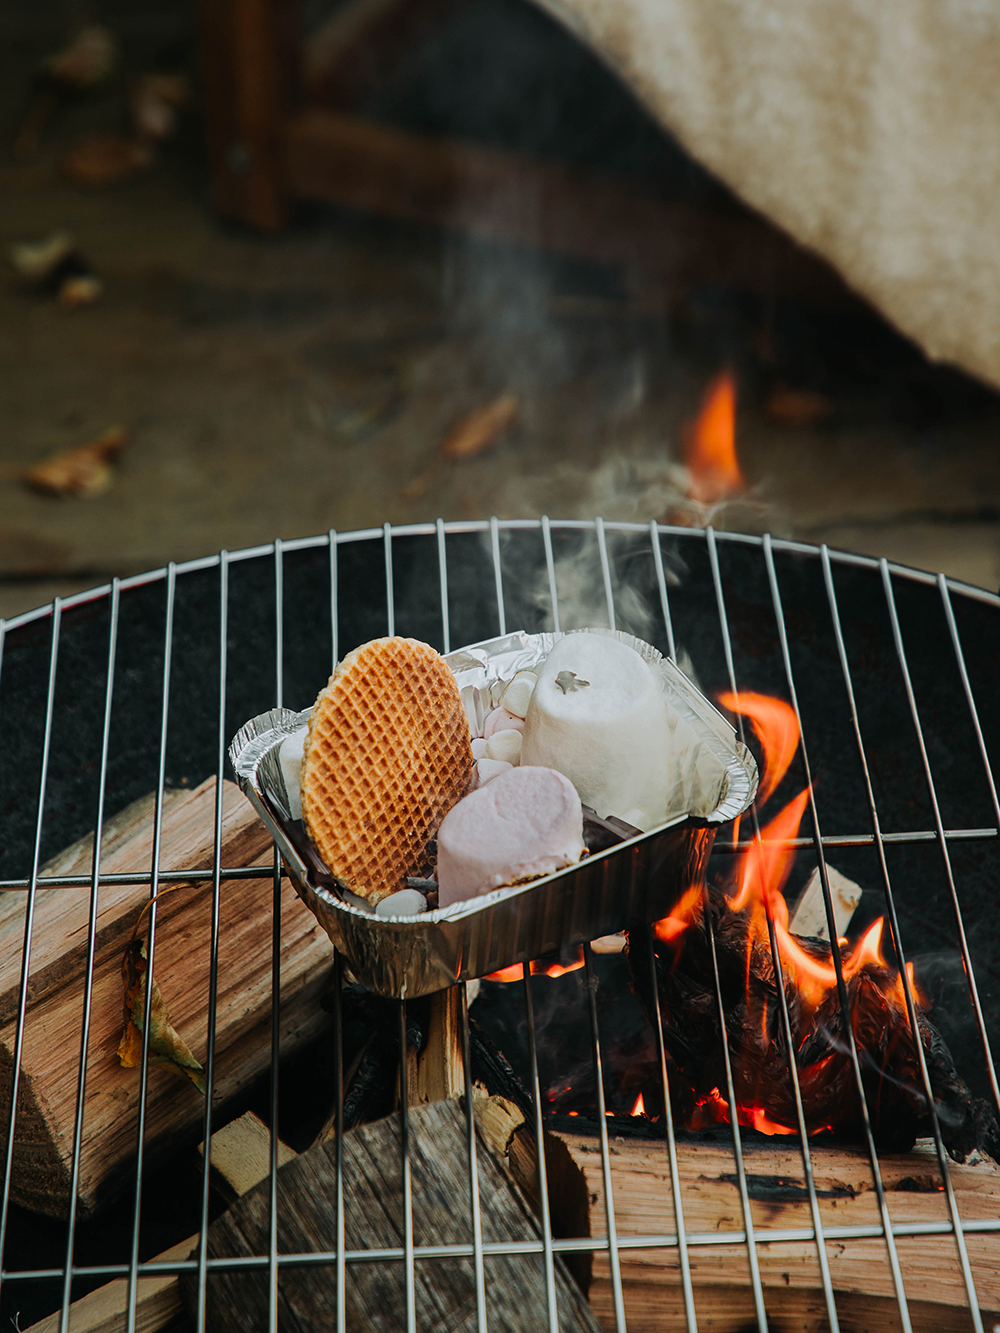 A tin foil box filled with marshmallows, stroopwafels, chocolate and biscuits sits on a wire grate on top of a fire pit.